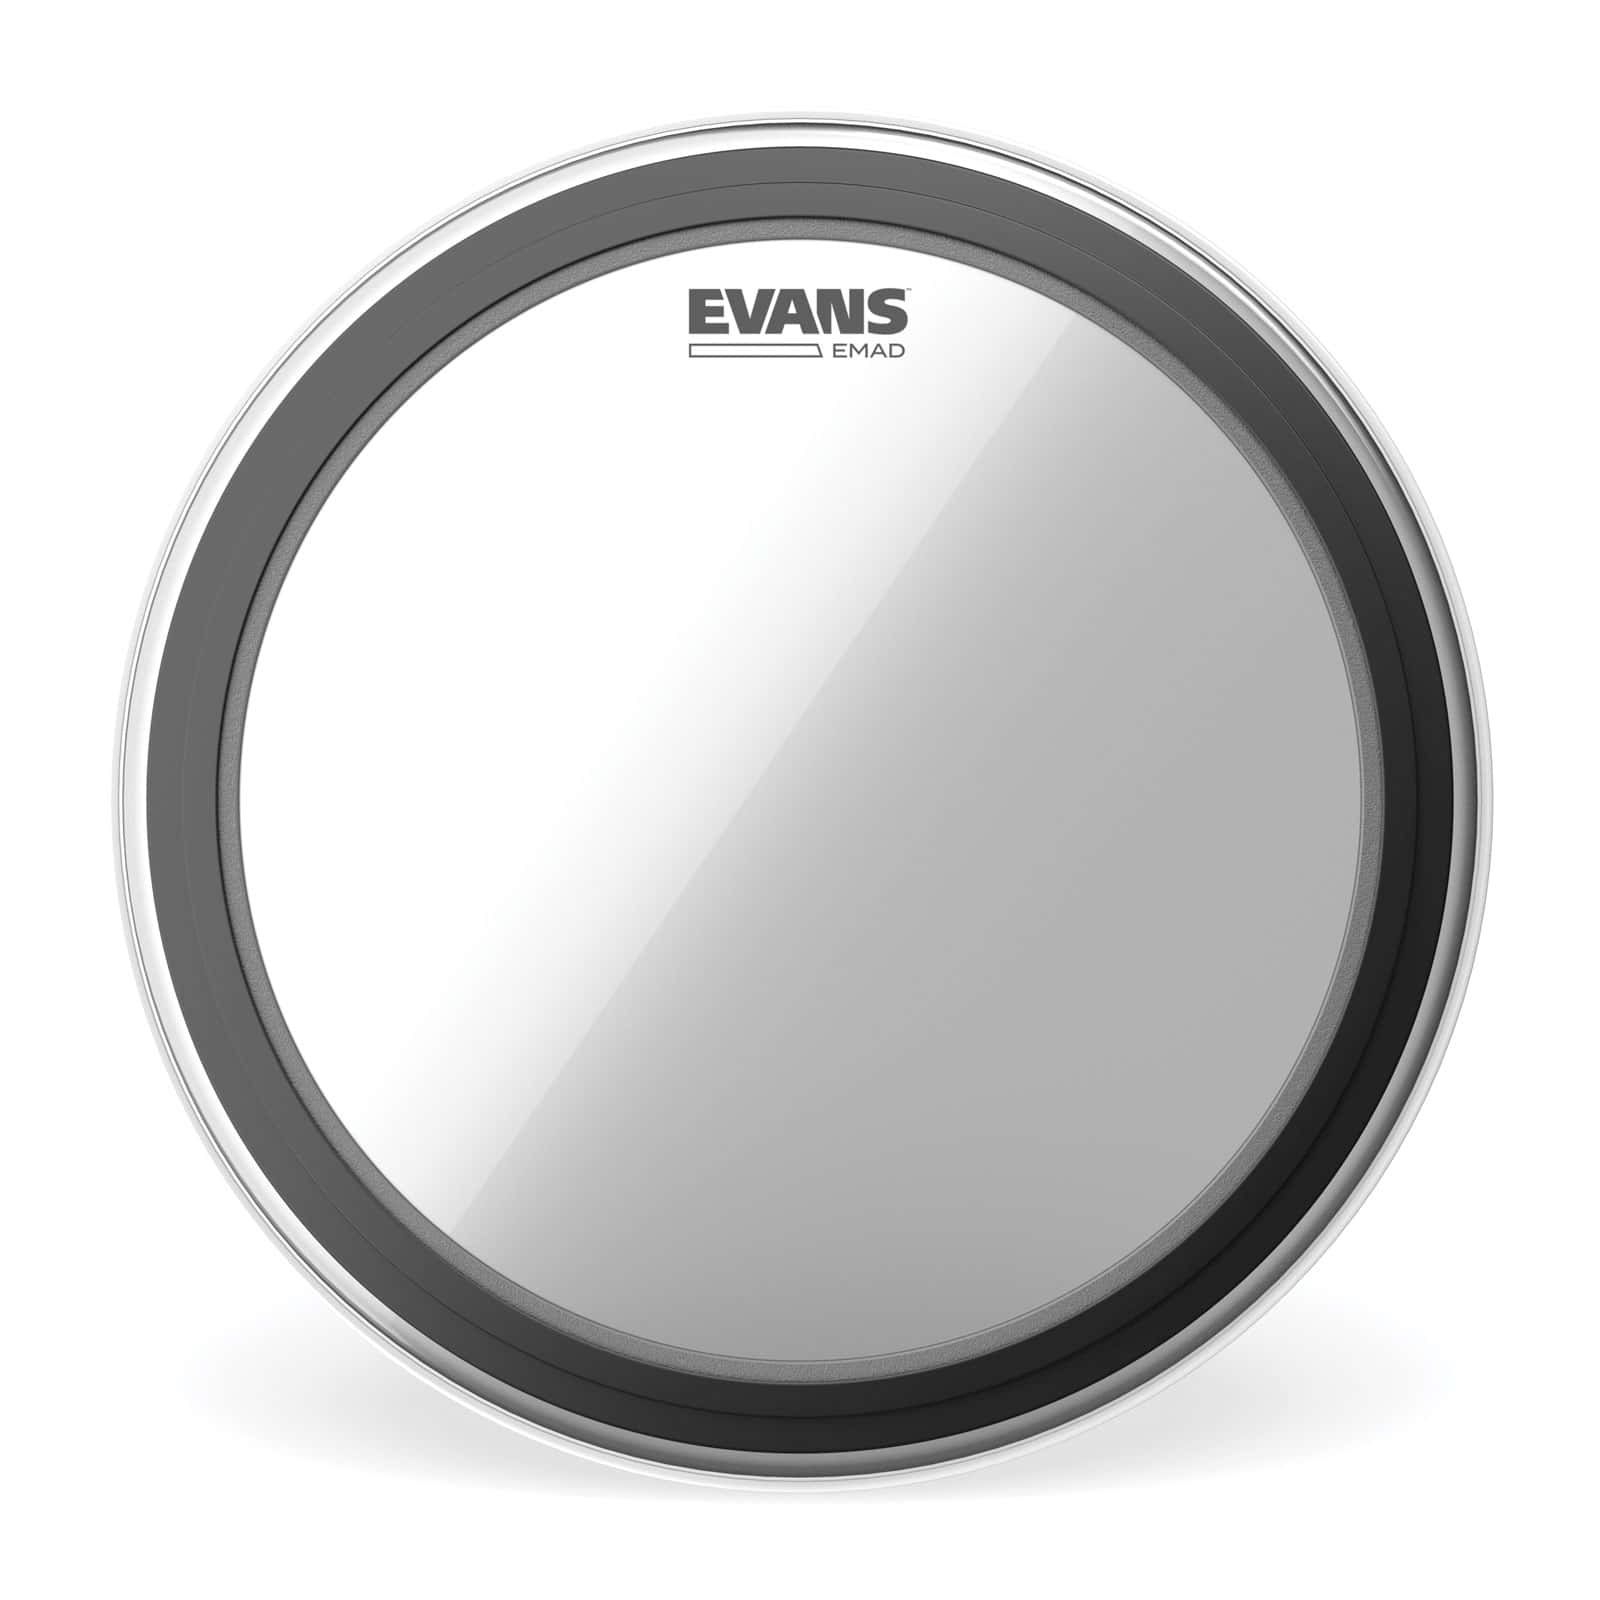 EVANS BD20EMAD - EMAD CLEAR 20